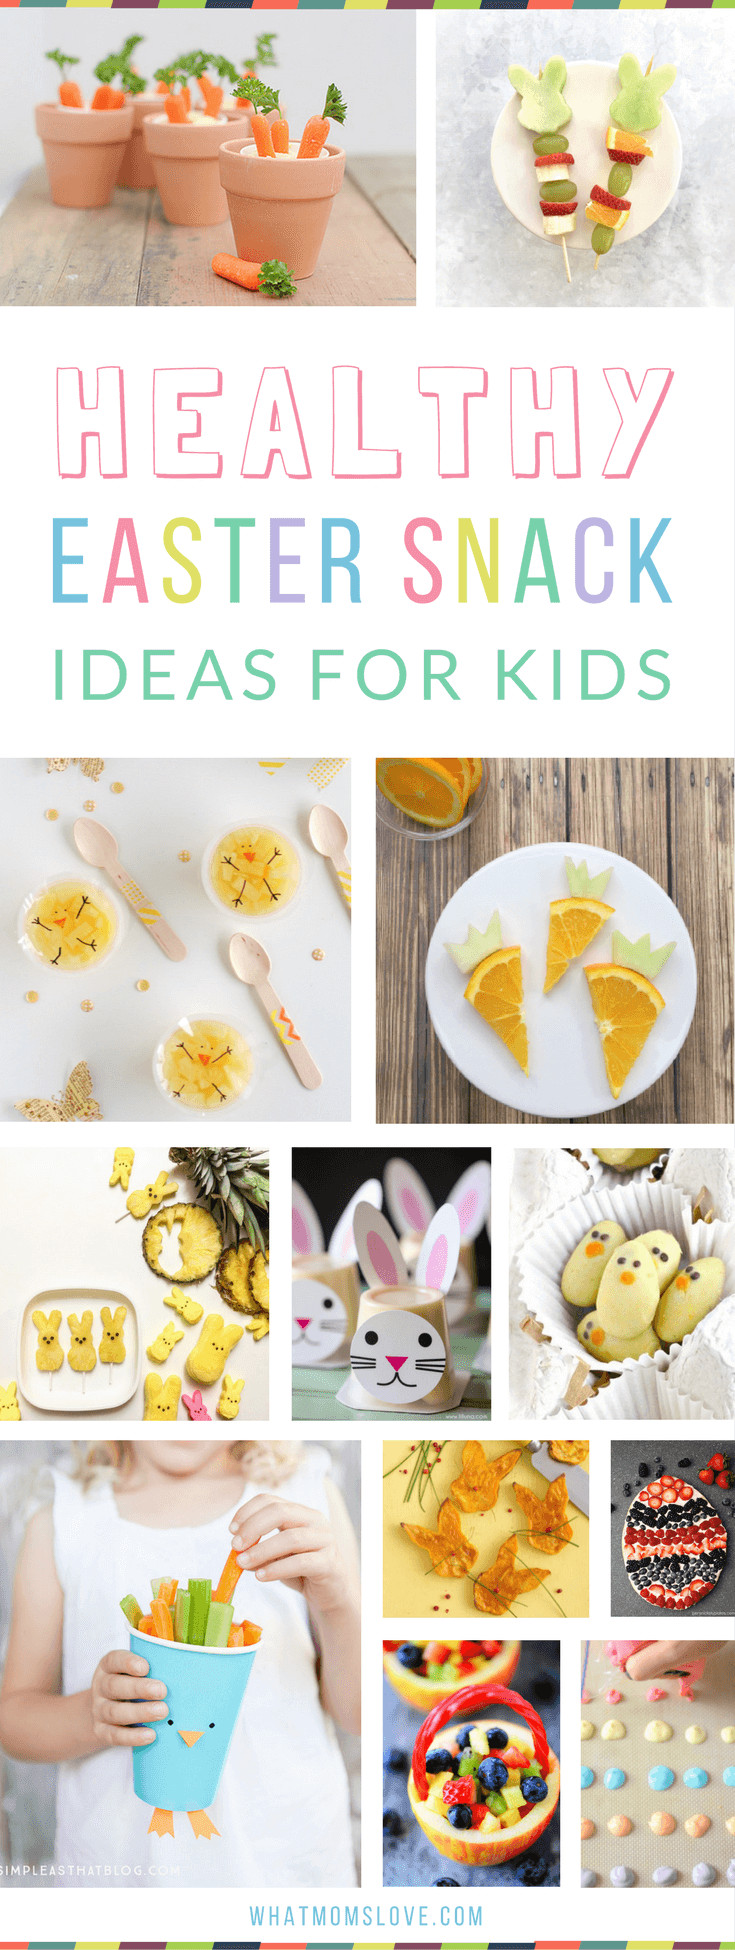 School Easter Party Ideas
 A Day s Worth Creative Easter Eats Breakfast Lunch